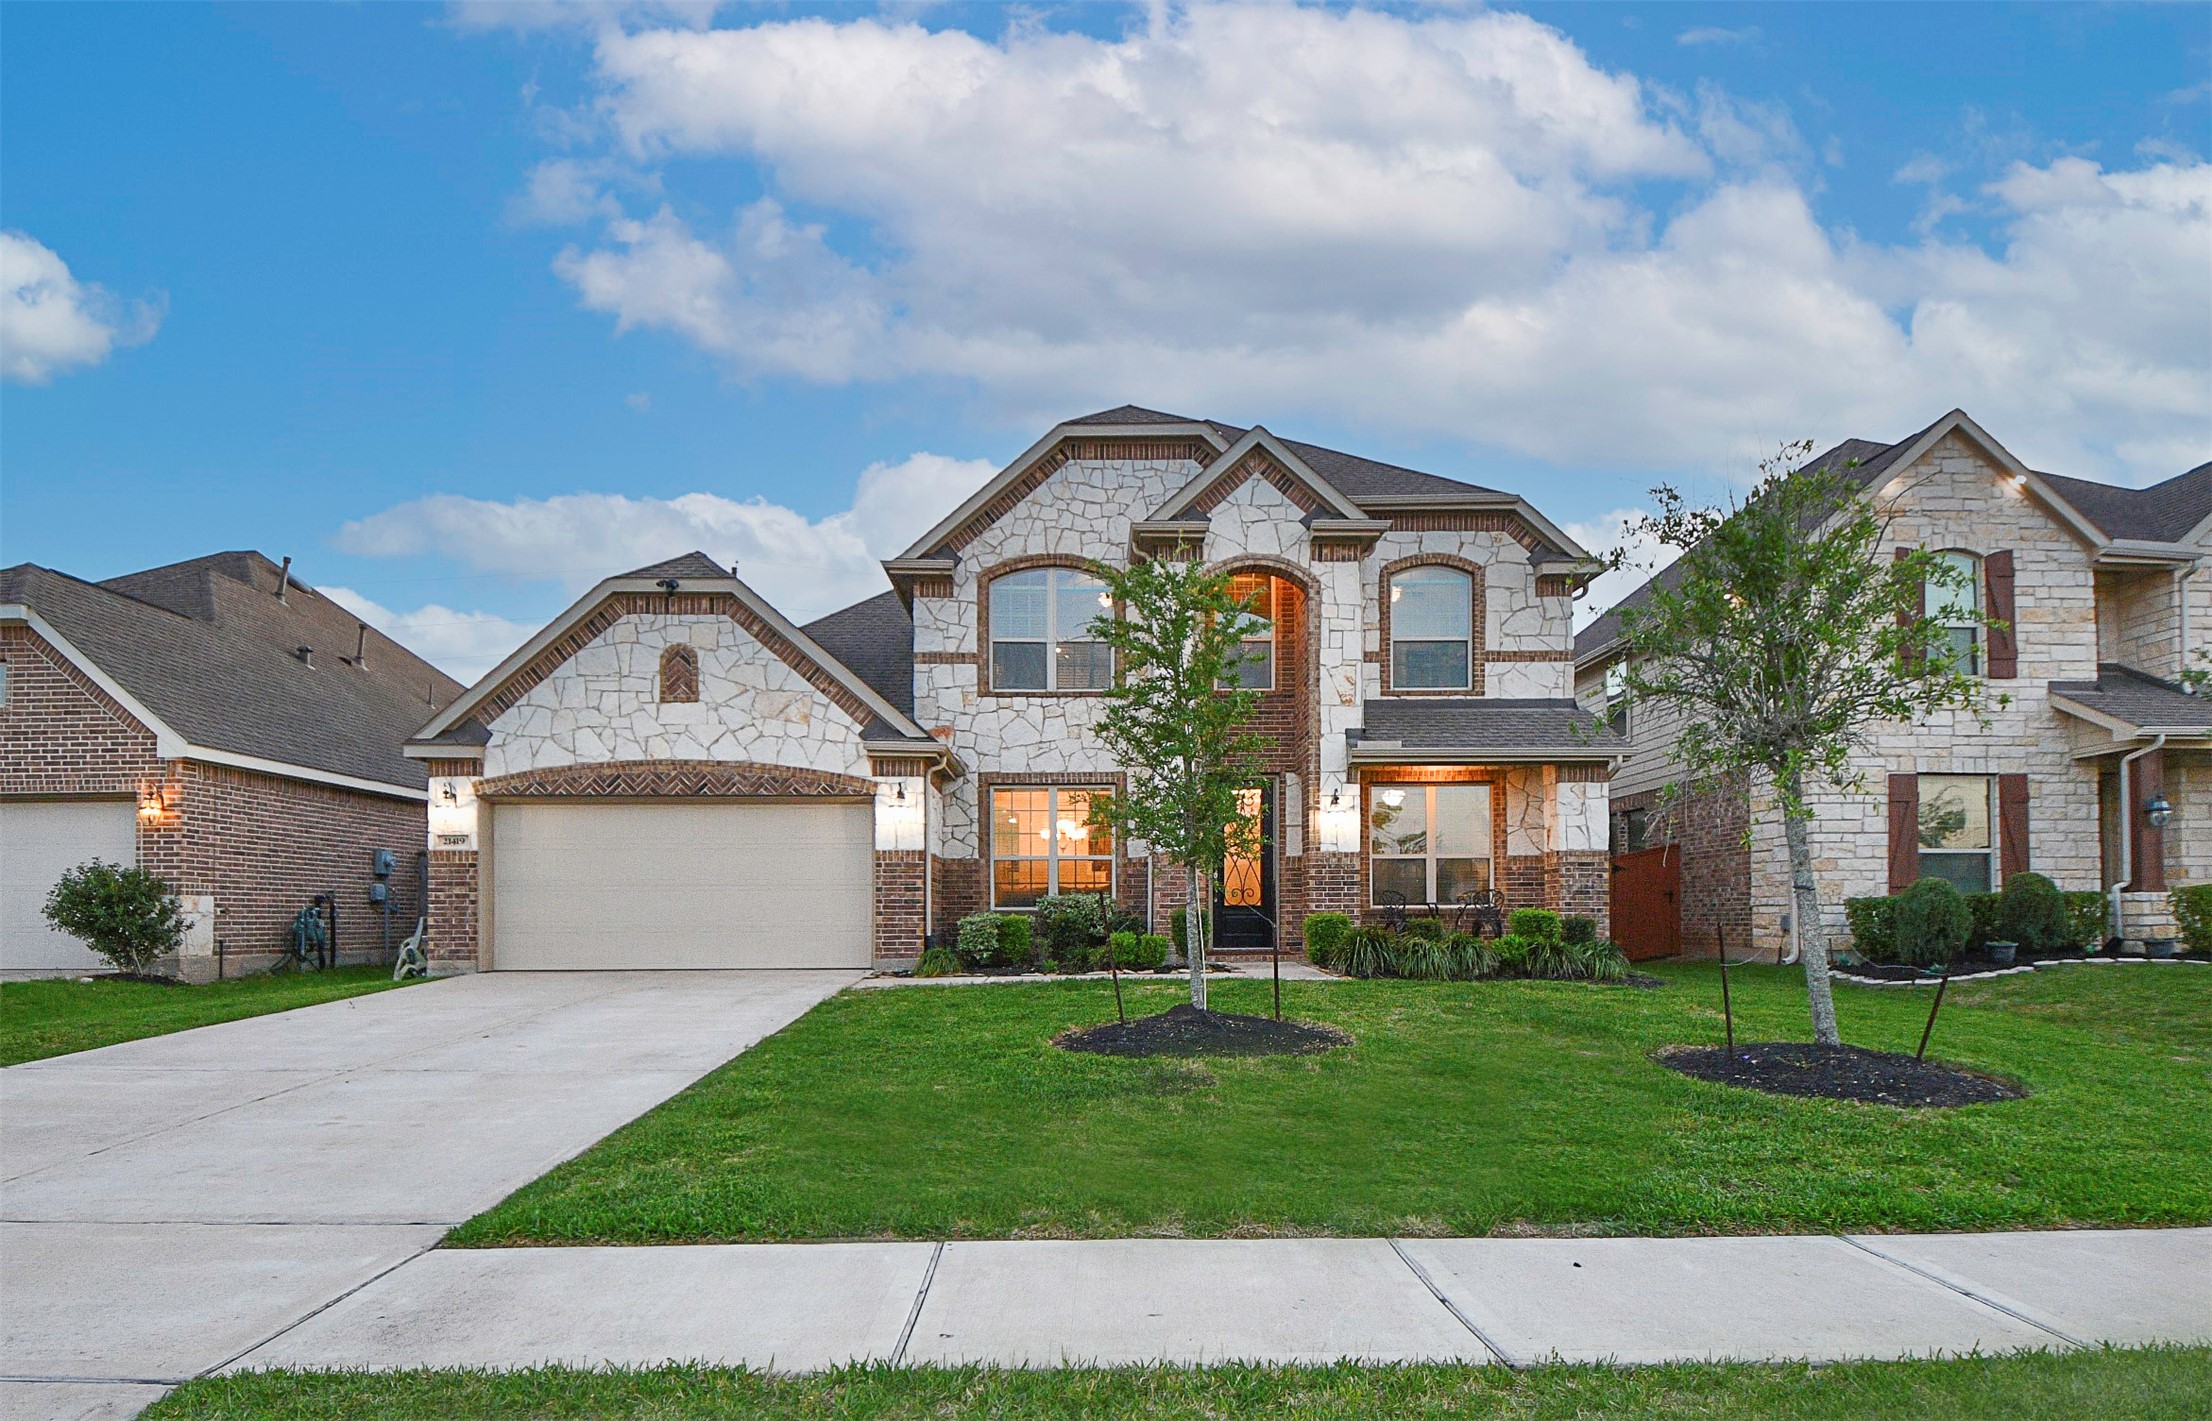 21419 Crested Valley Drive   Richmond TX 77407